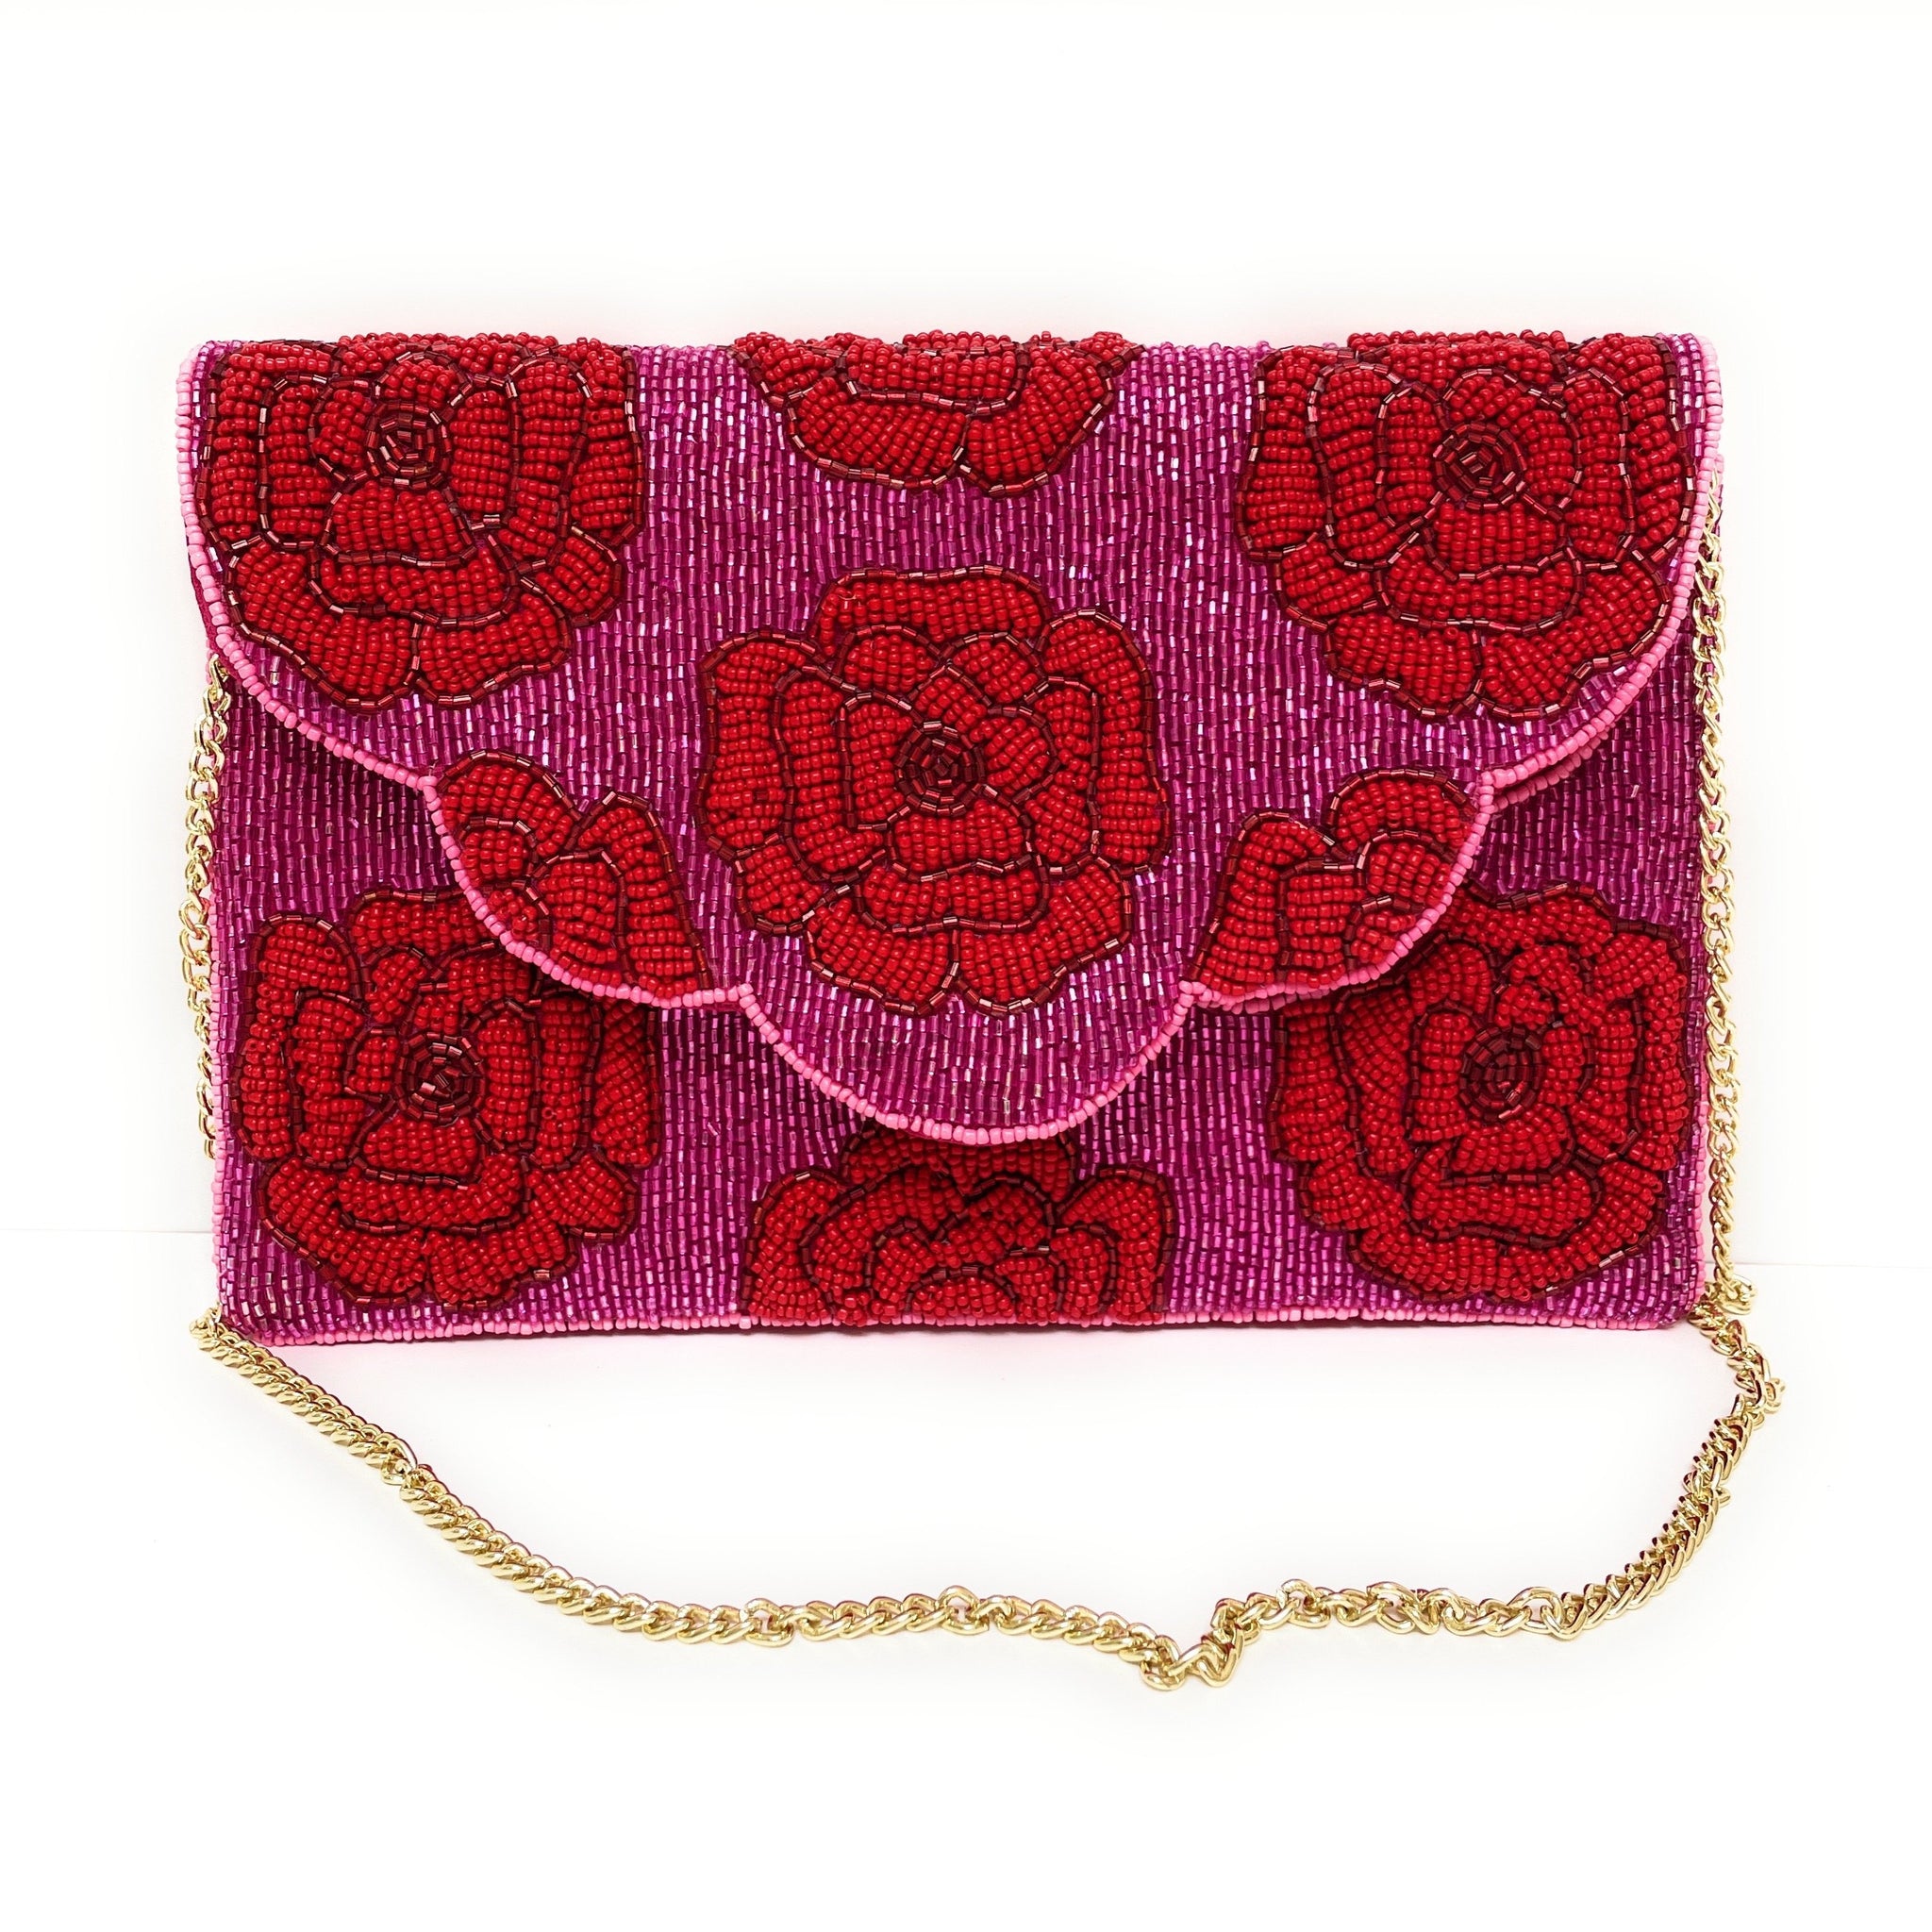 Party Red Clutch - Buy Party Red Clutch online in India